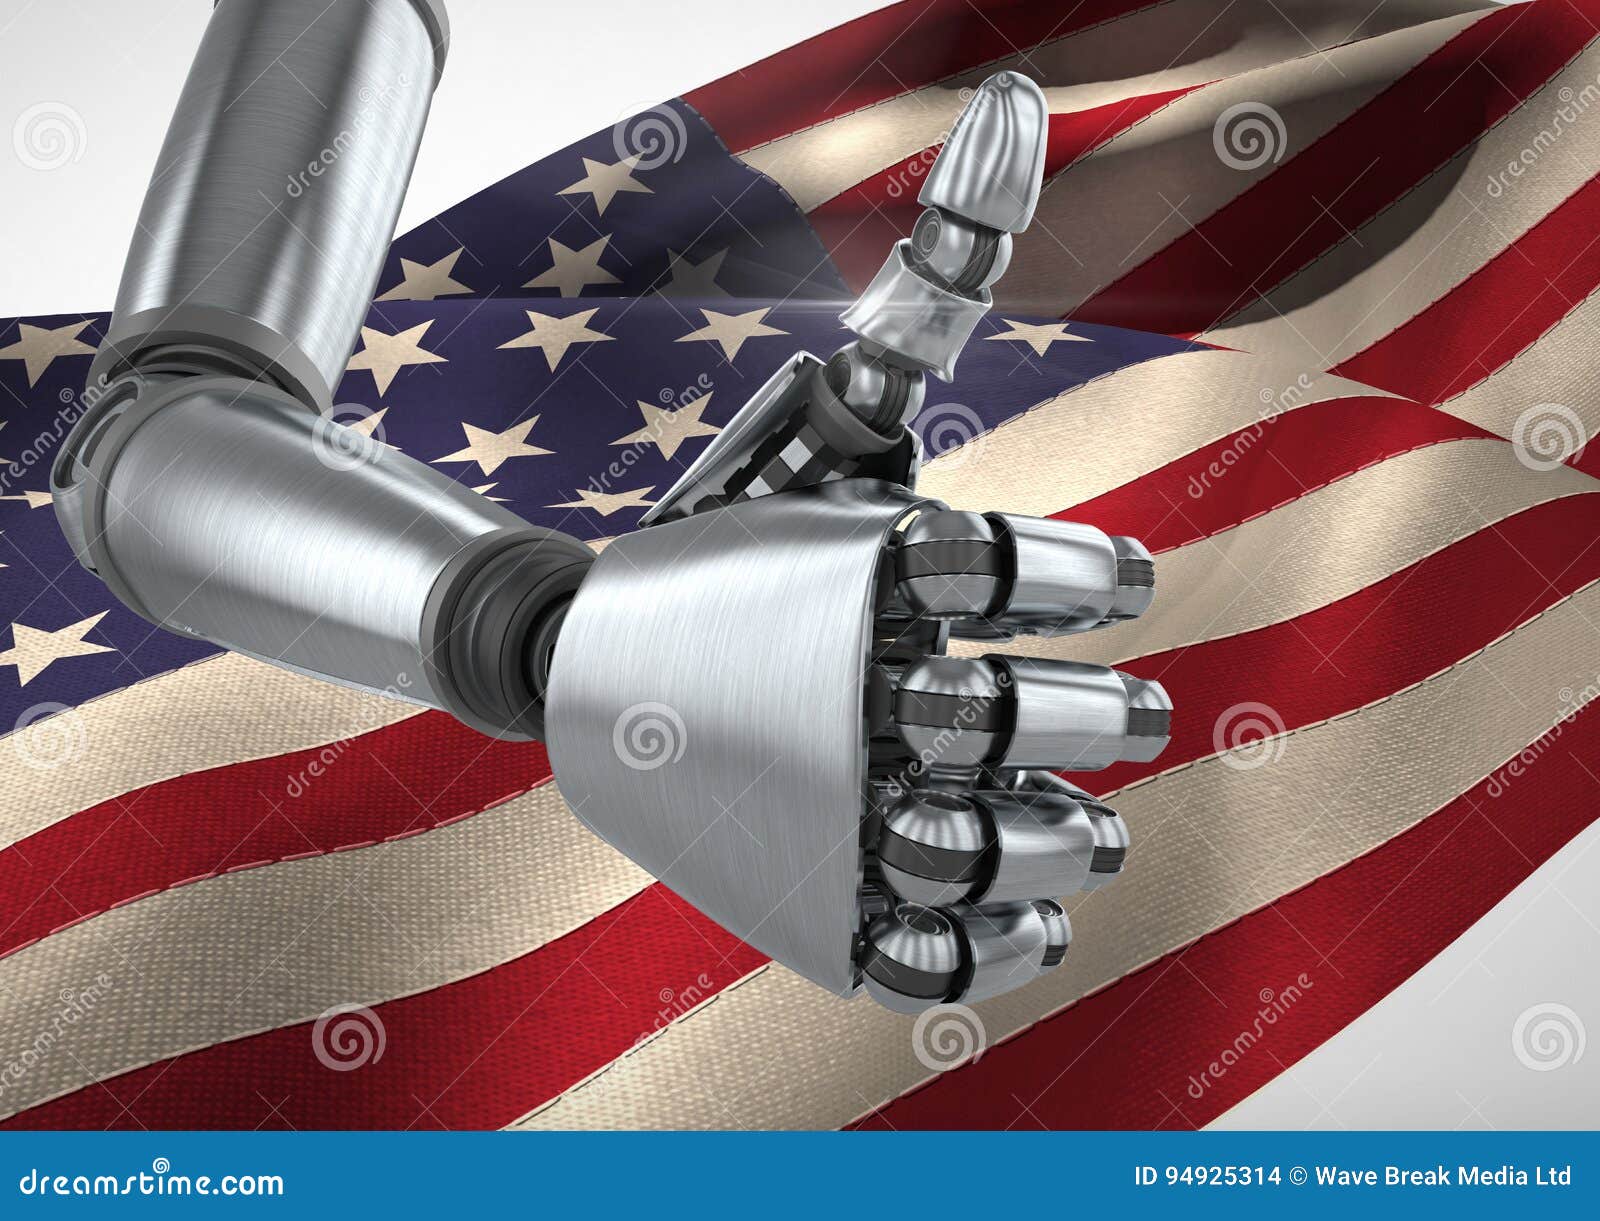 Robot With Thumbs Up Against American Flag Stock Illustration ...